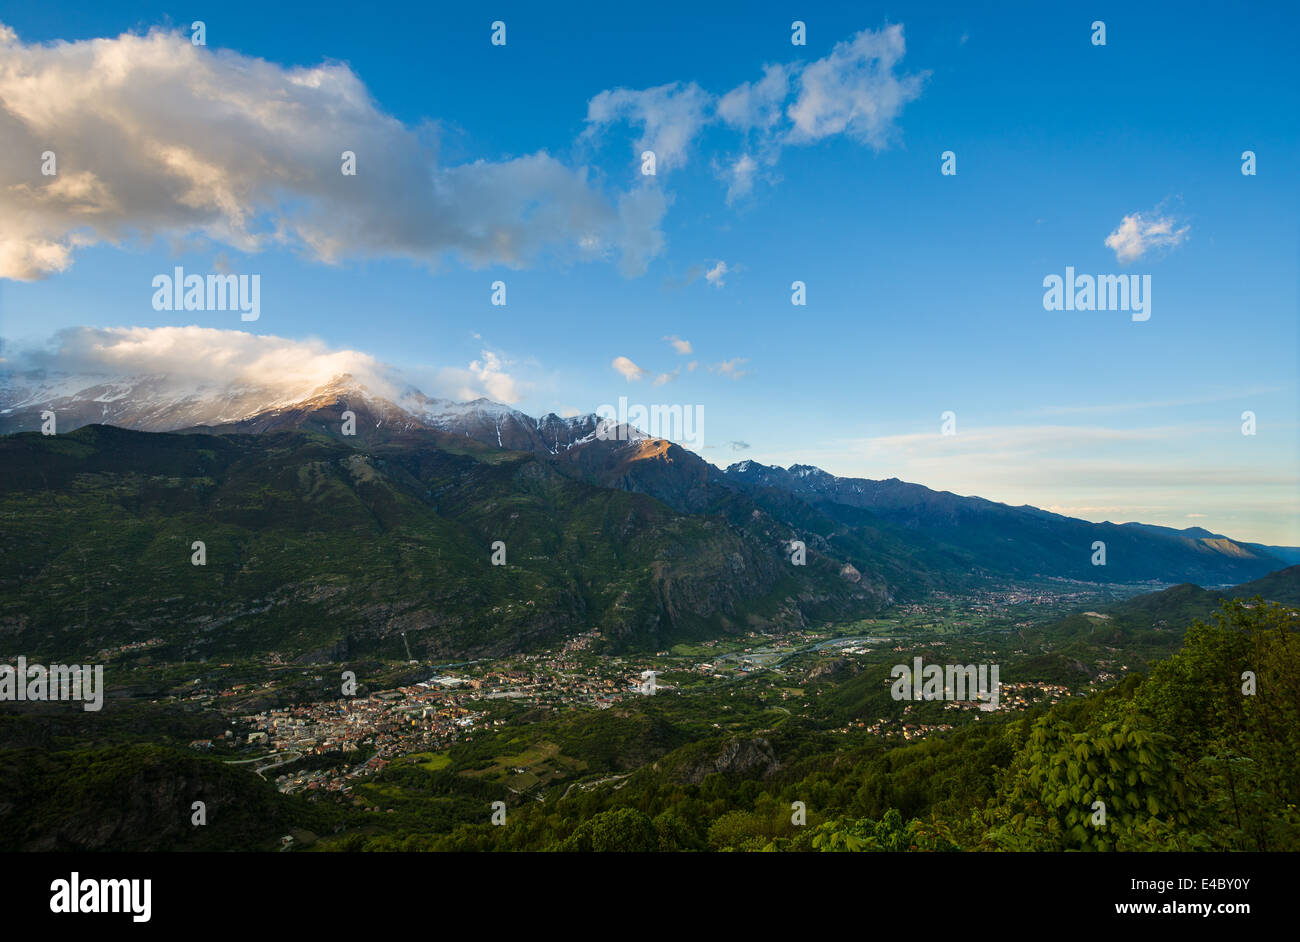 View across the Susa Valley, Italy from Frais. The mountain of Rocciamelone (3538m) left centre. Stock Photo